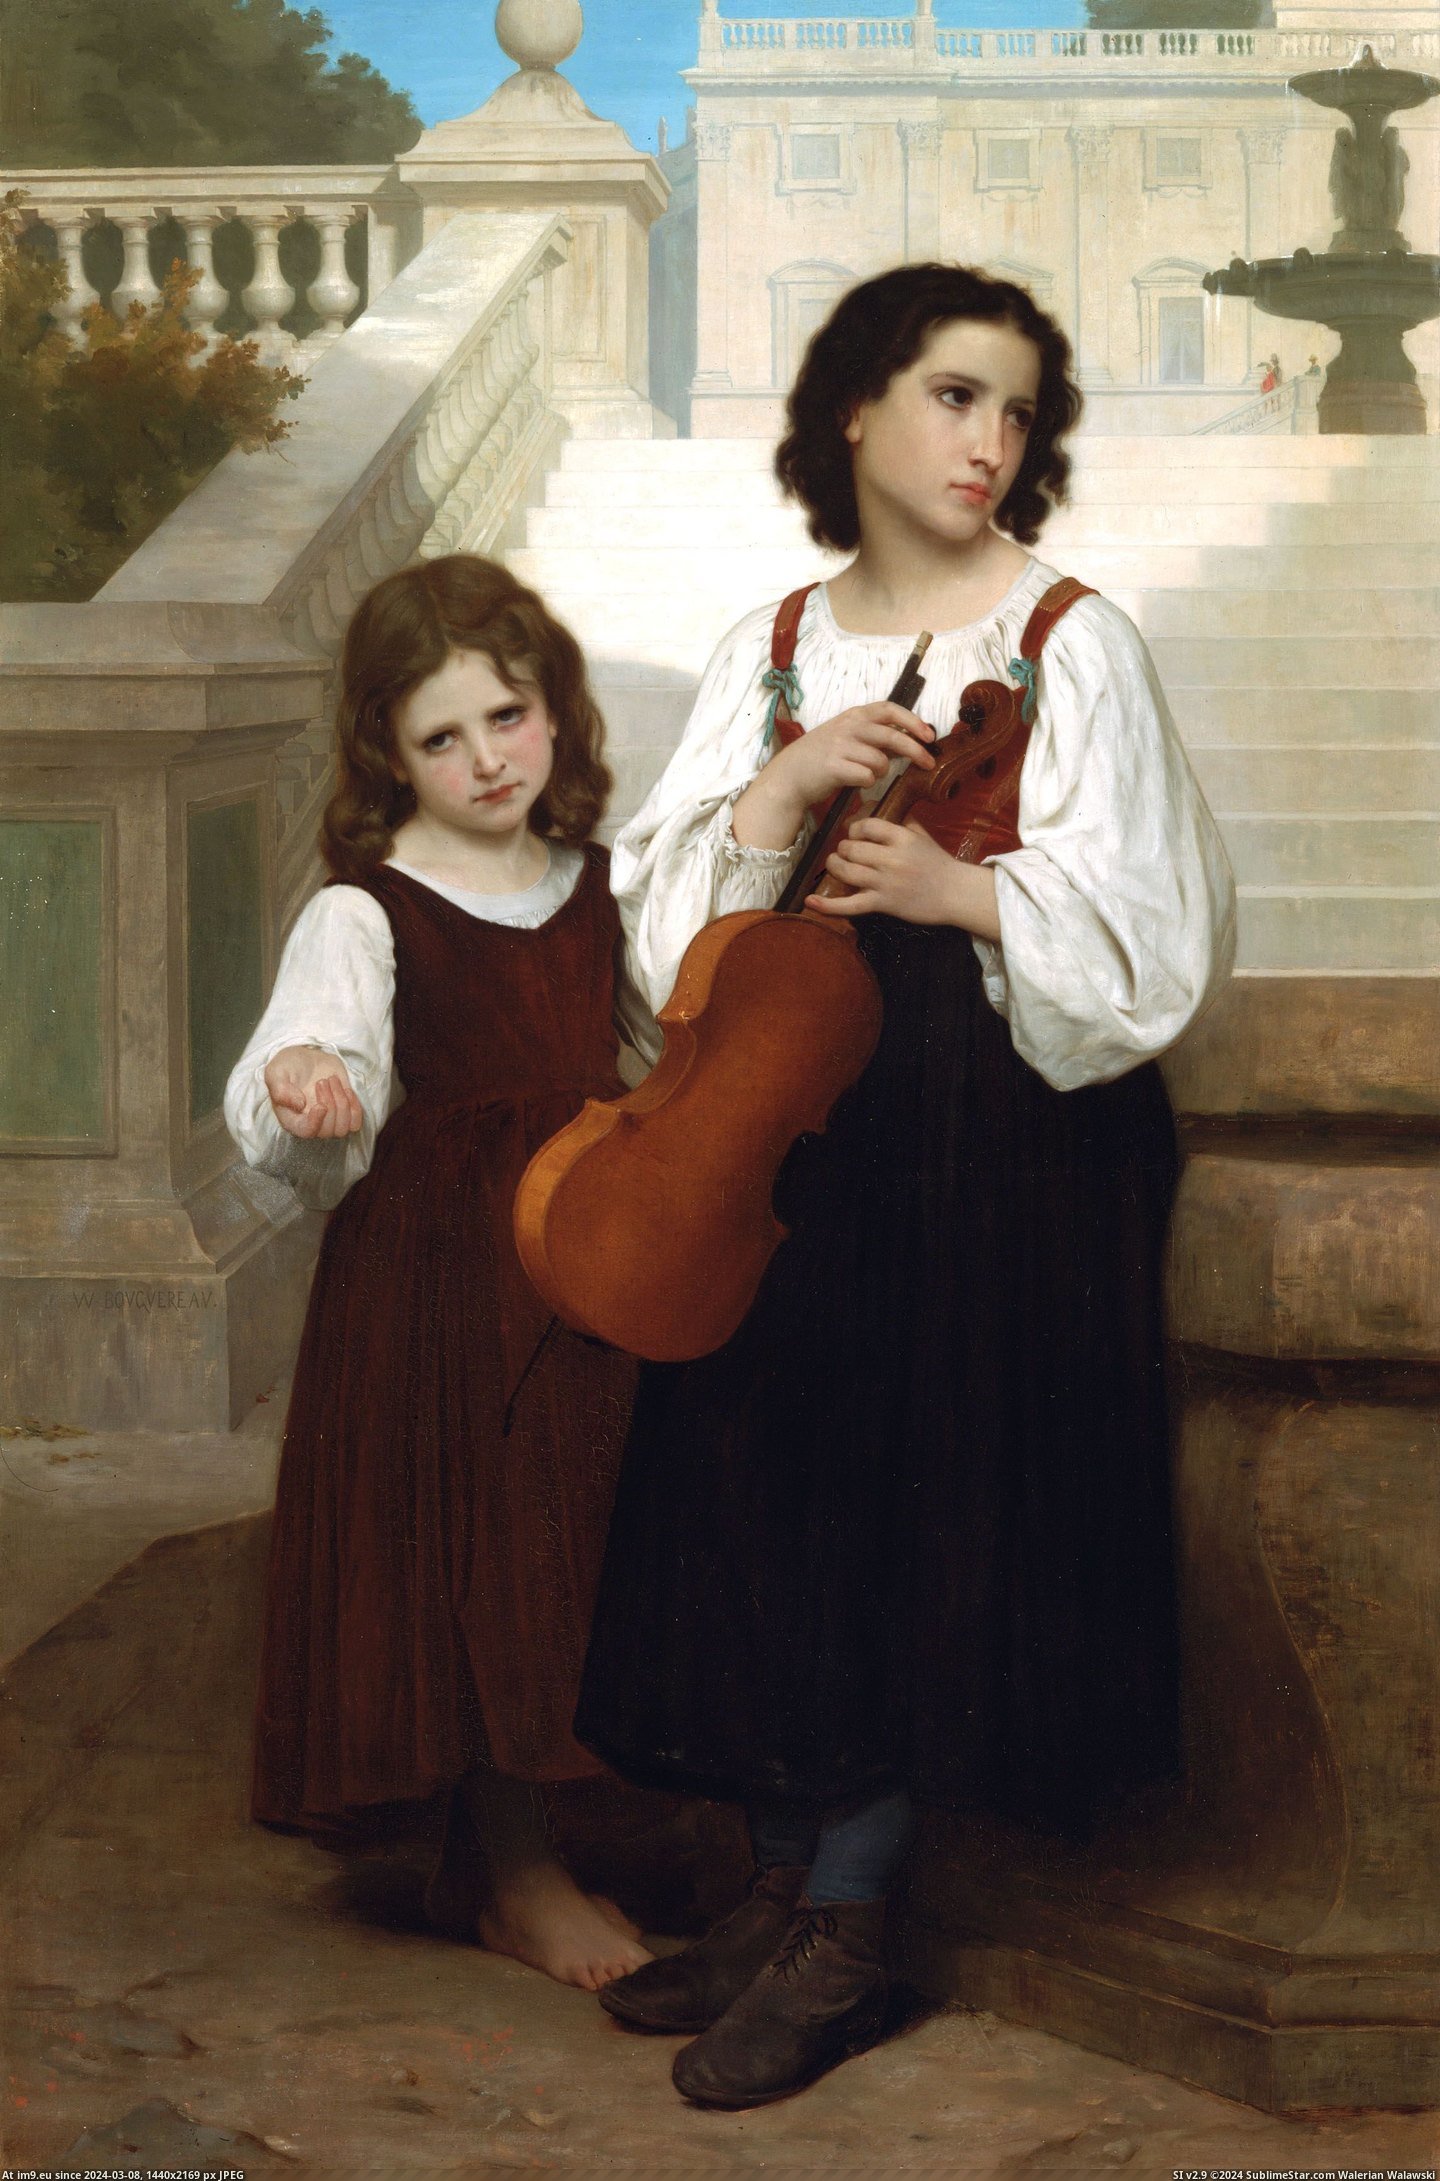 #Art #Painting #Paintings #Pays #Loin #William #Bouguereau #Adolphe (1867) Loin Du Pays - William Adolphe Bouguereau Pic. (Obraz z album William Adolphe Bouguereau paintings (1825-1905)))